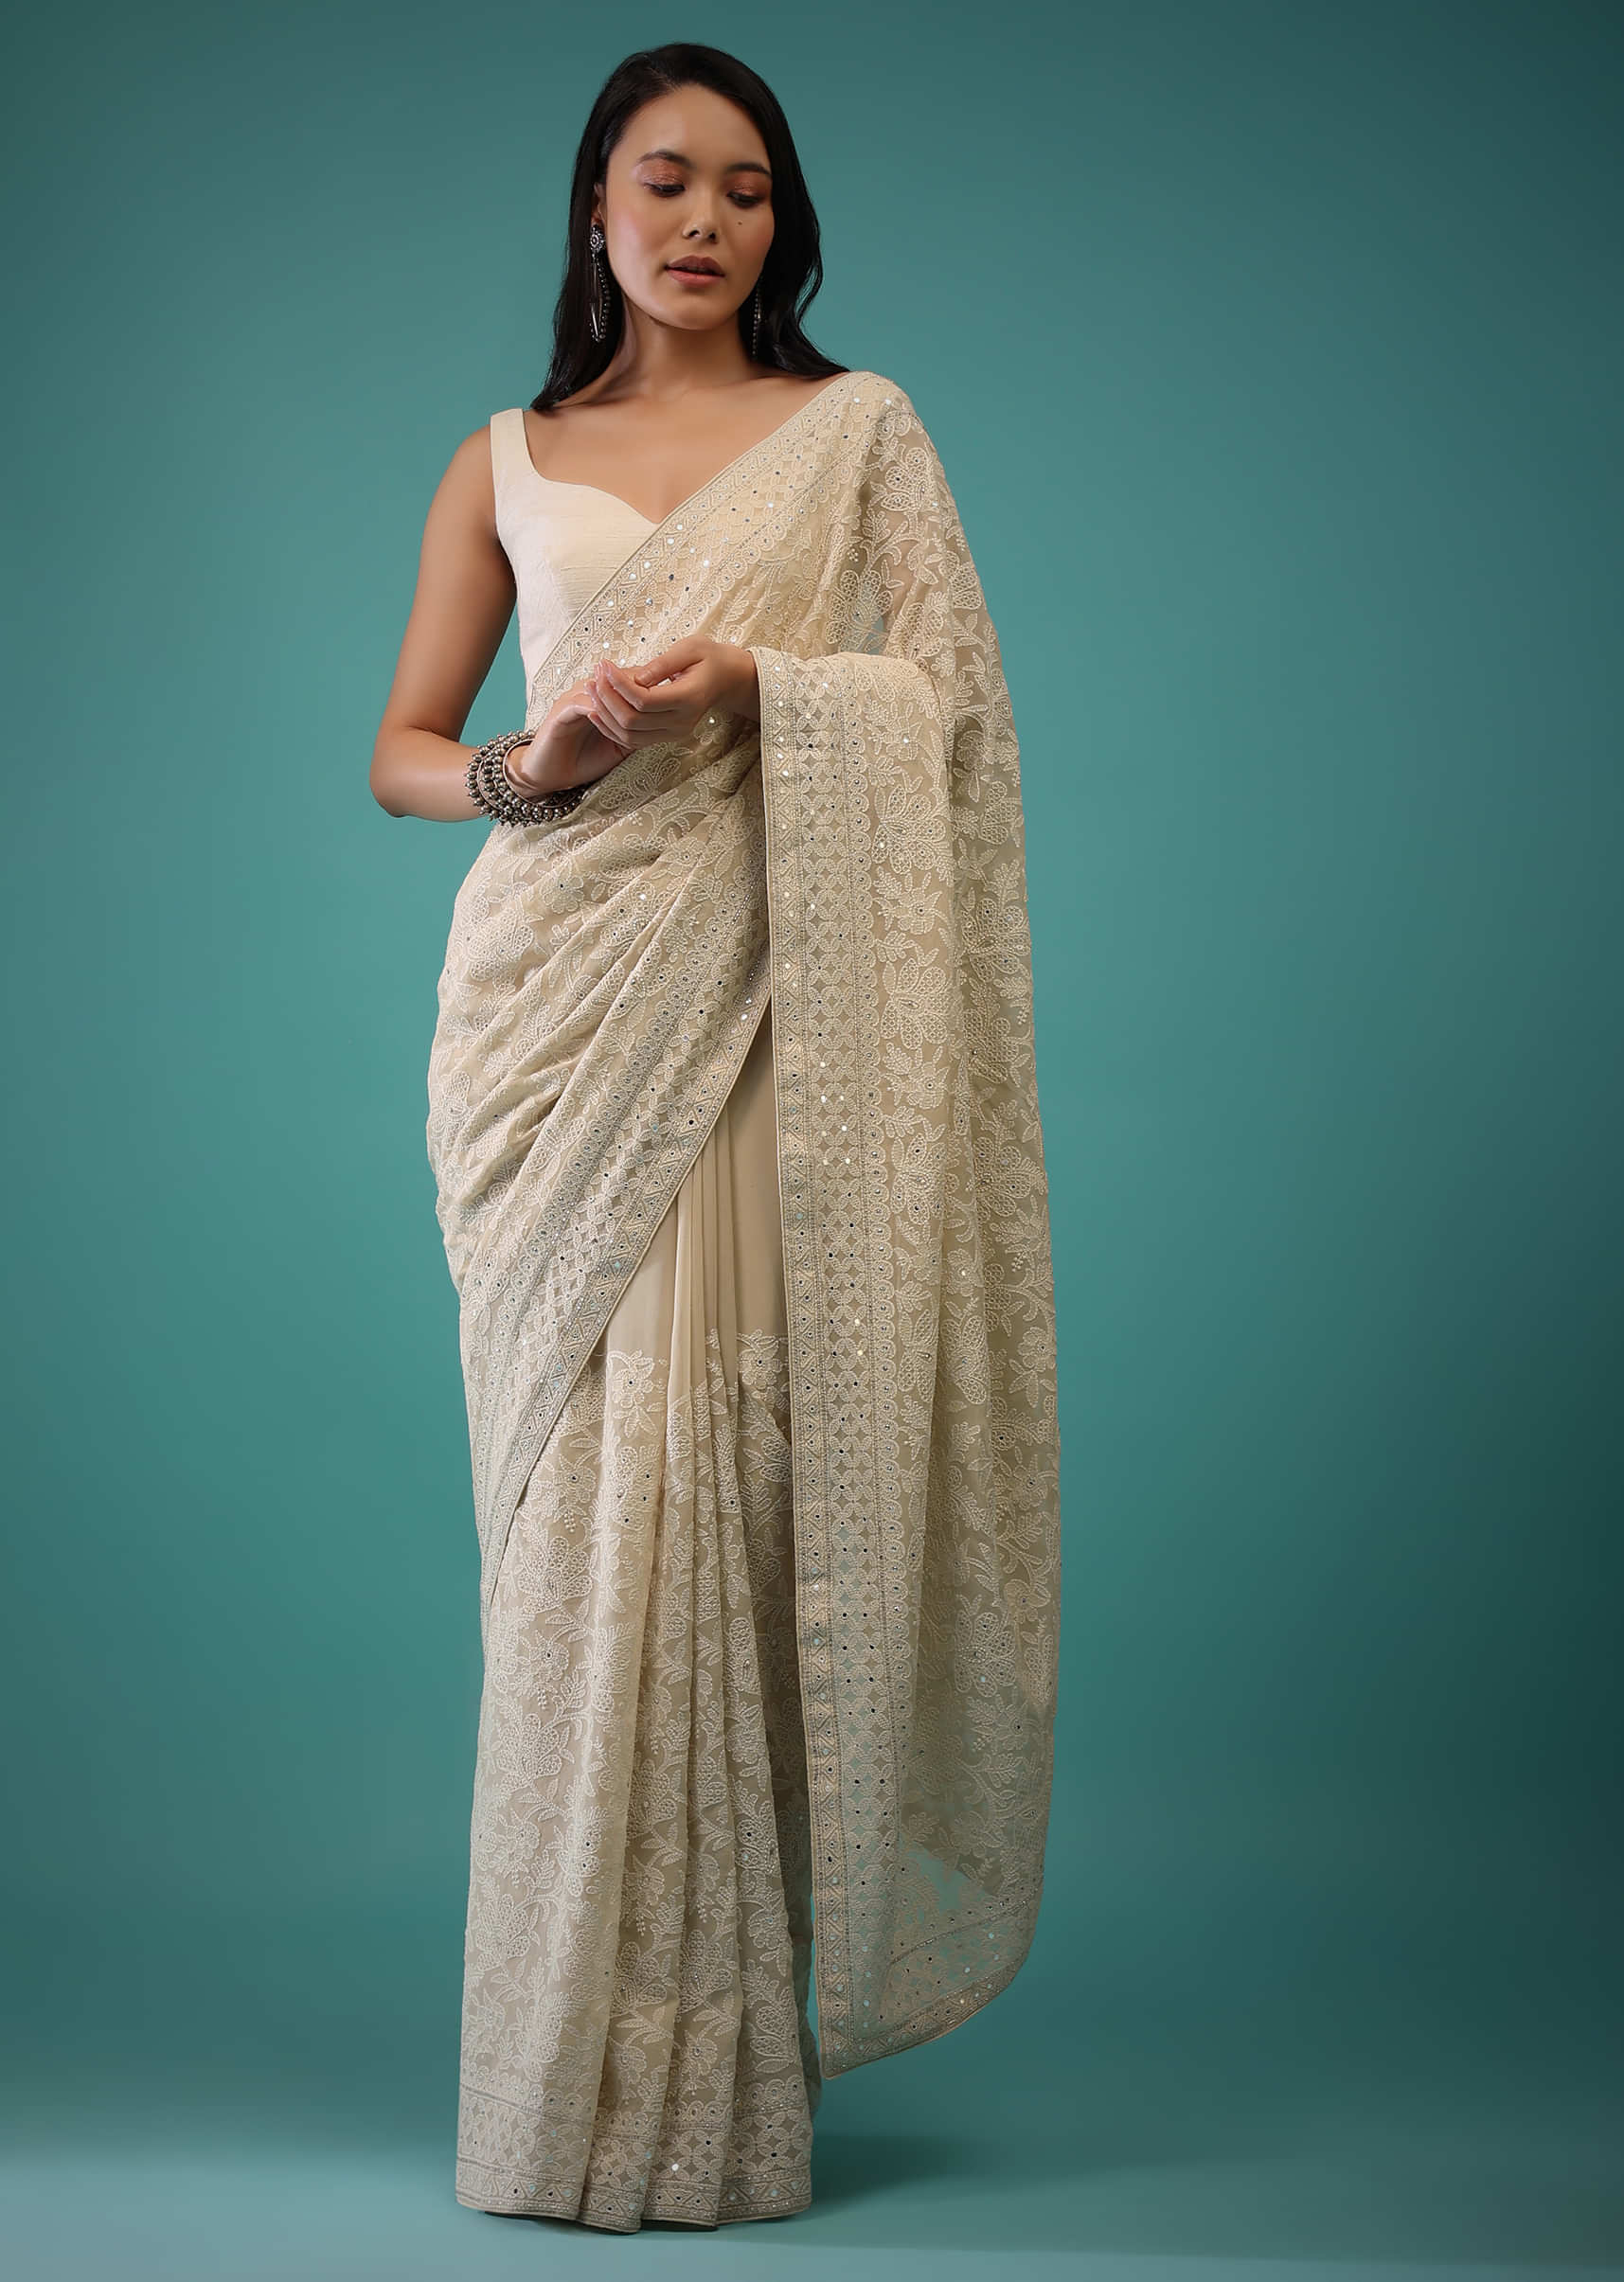 Candid Ginger Georgette Saree In Lucknowi Threadwork, Mirror Abla And Cut Dana Embroidery Buttis On The Border